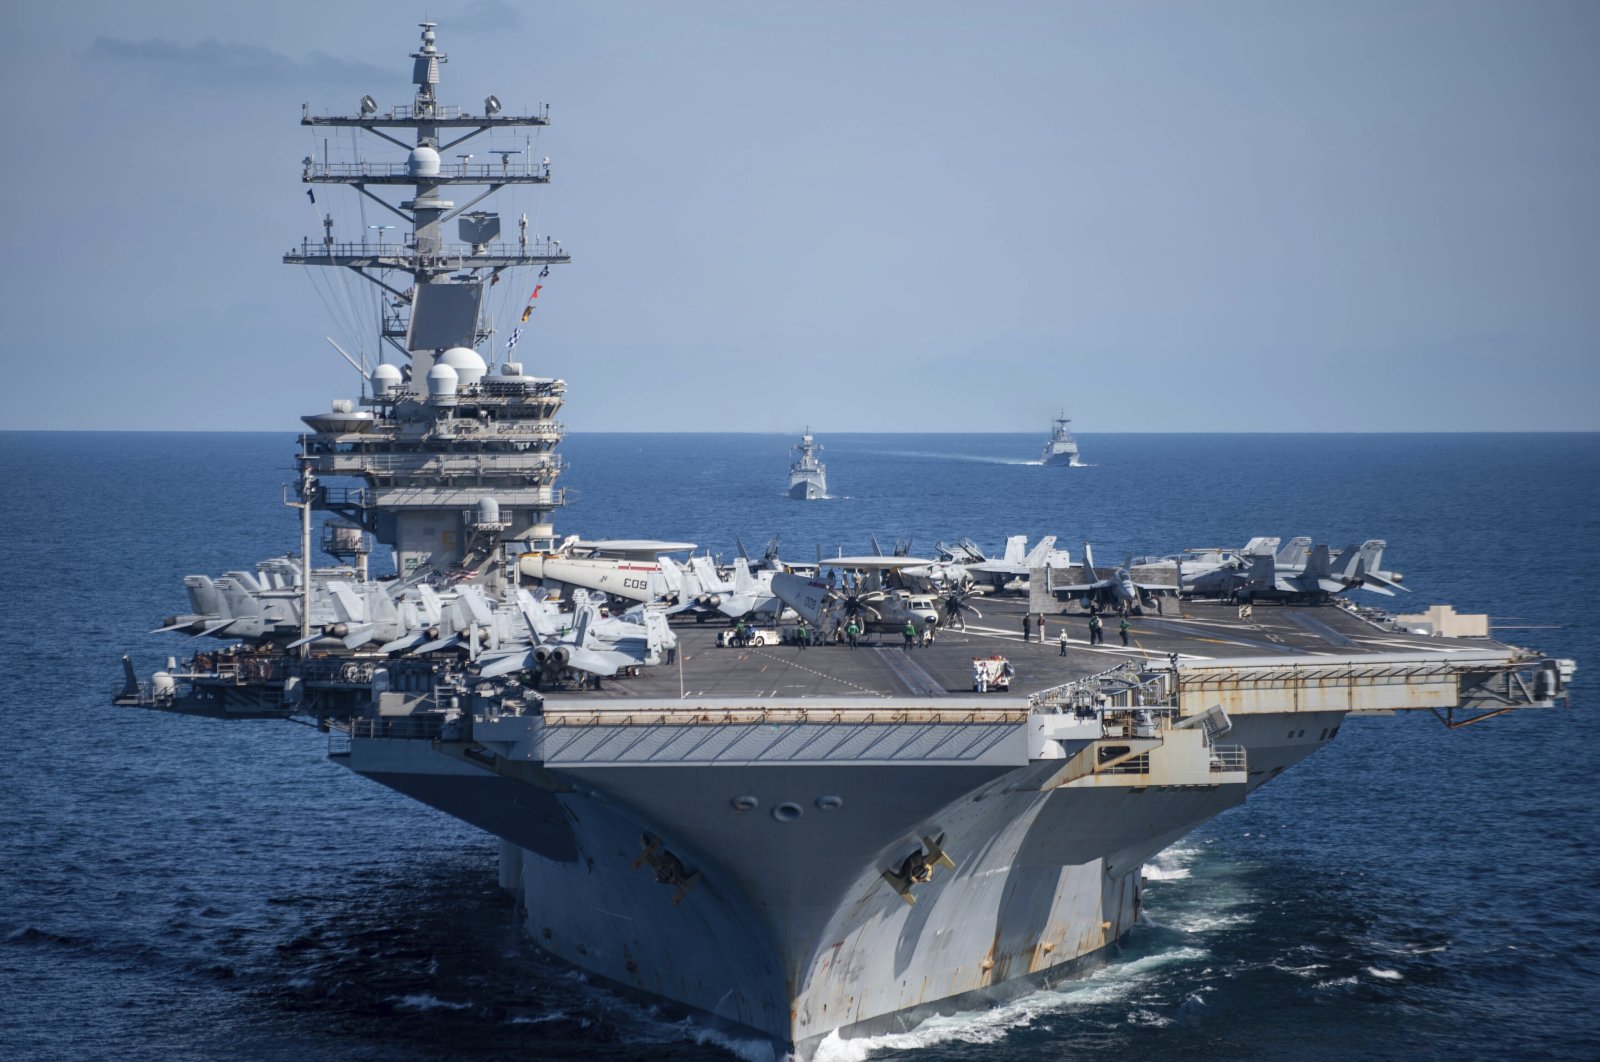 The U.S. aircraft carrier USS Ronald Reagan participates with other U.S. and South Korean naval ships during the joint naval exercises between the United States and South Korea in waters off South Korea&#039;s eastern coast, Sept. 29, 2022. (South Korea Navy/Yonhap via AP)